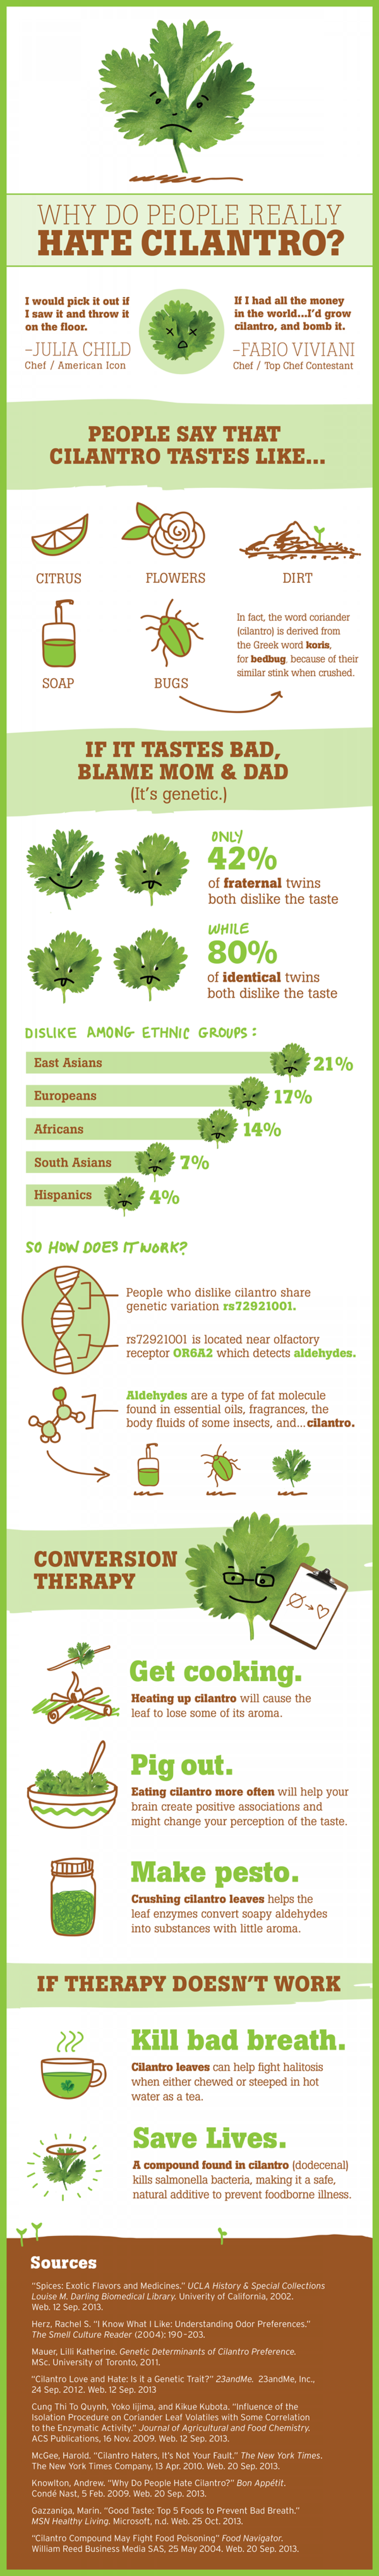 Why Do People Really Hate Cilantro? Infographic